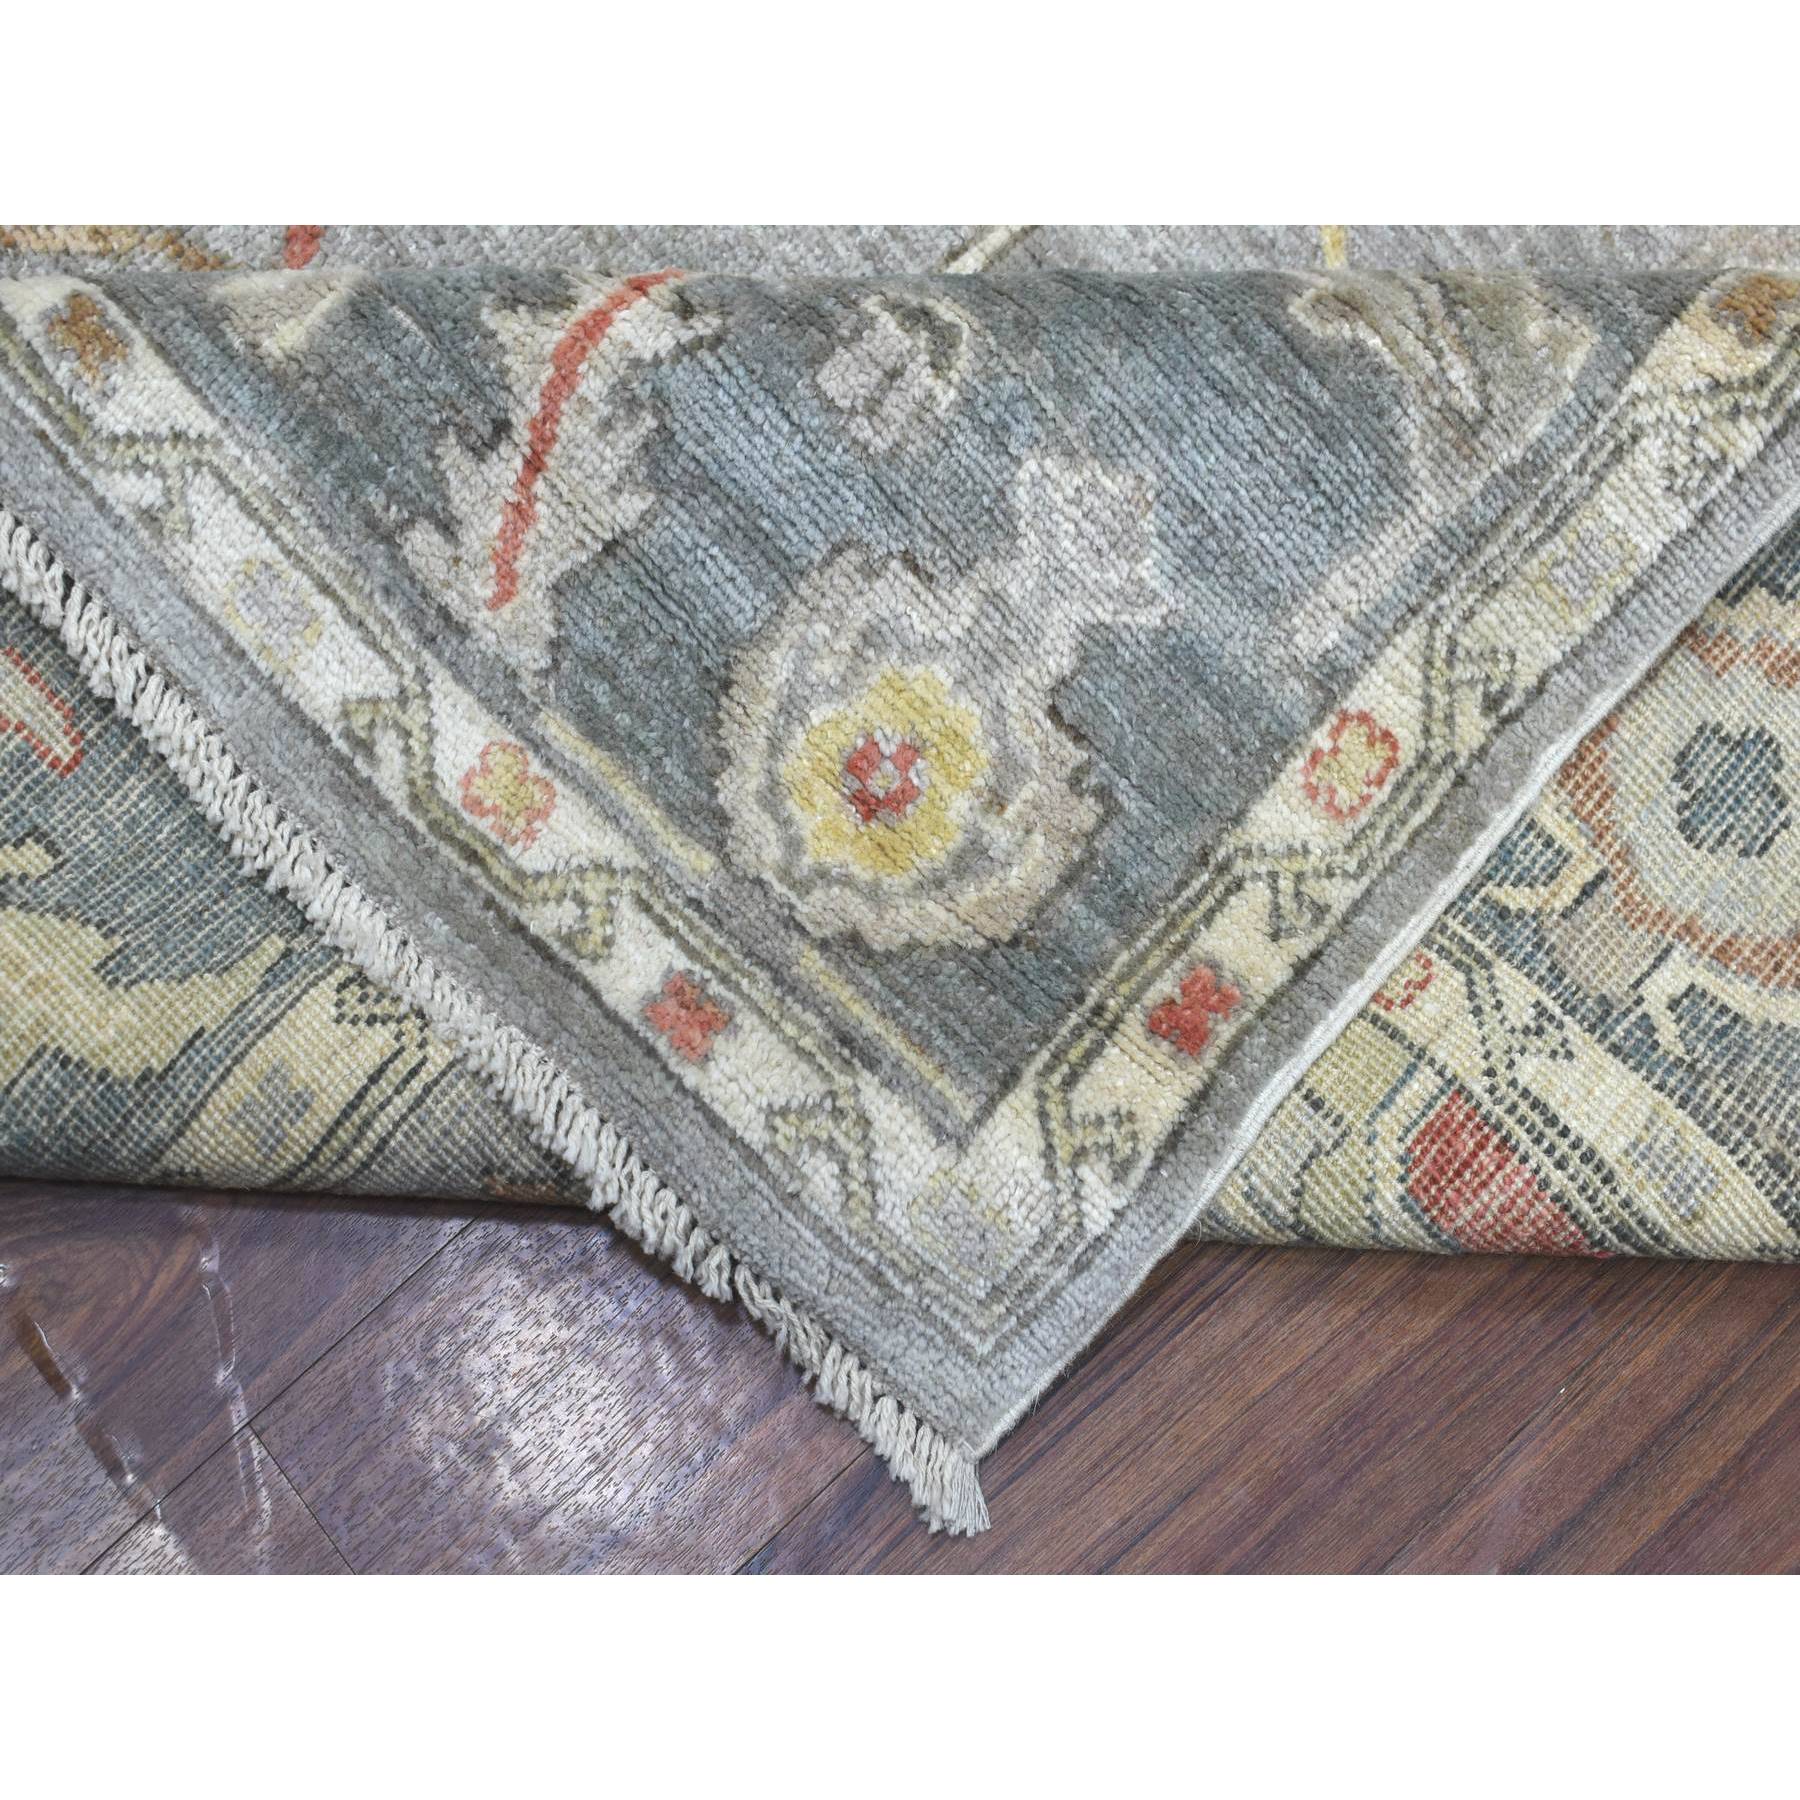 8'x16' Gray Afghan Angora Ushak with Colorful Flowing and Open Design Hand Woven Soft Wool Oriental Gallery Size Wide Runner Rug 